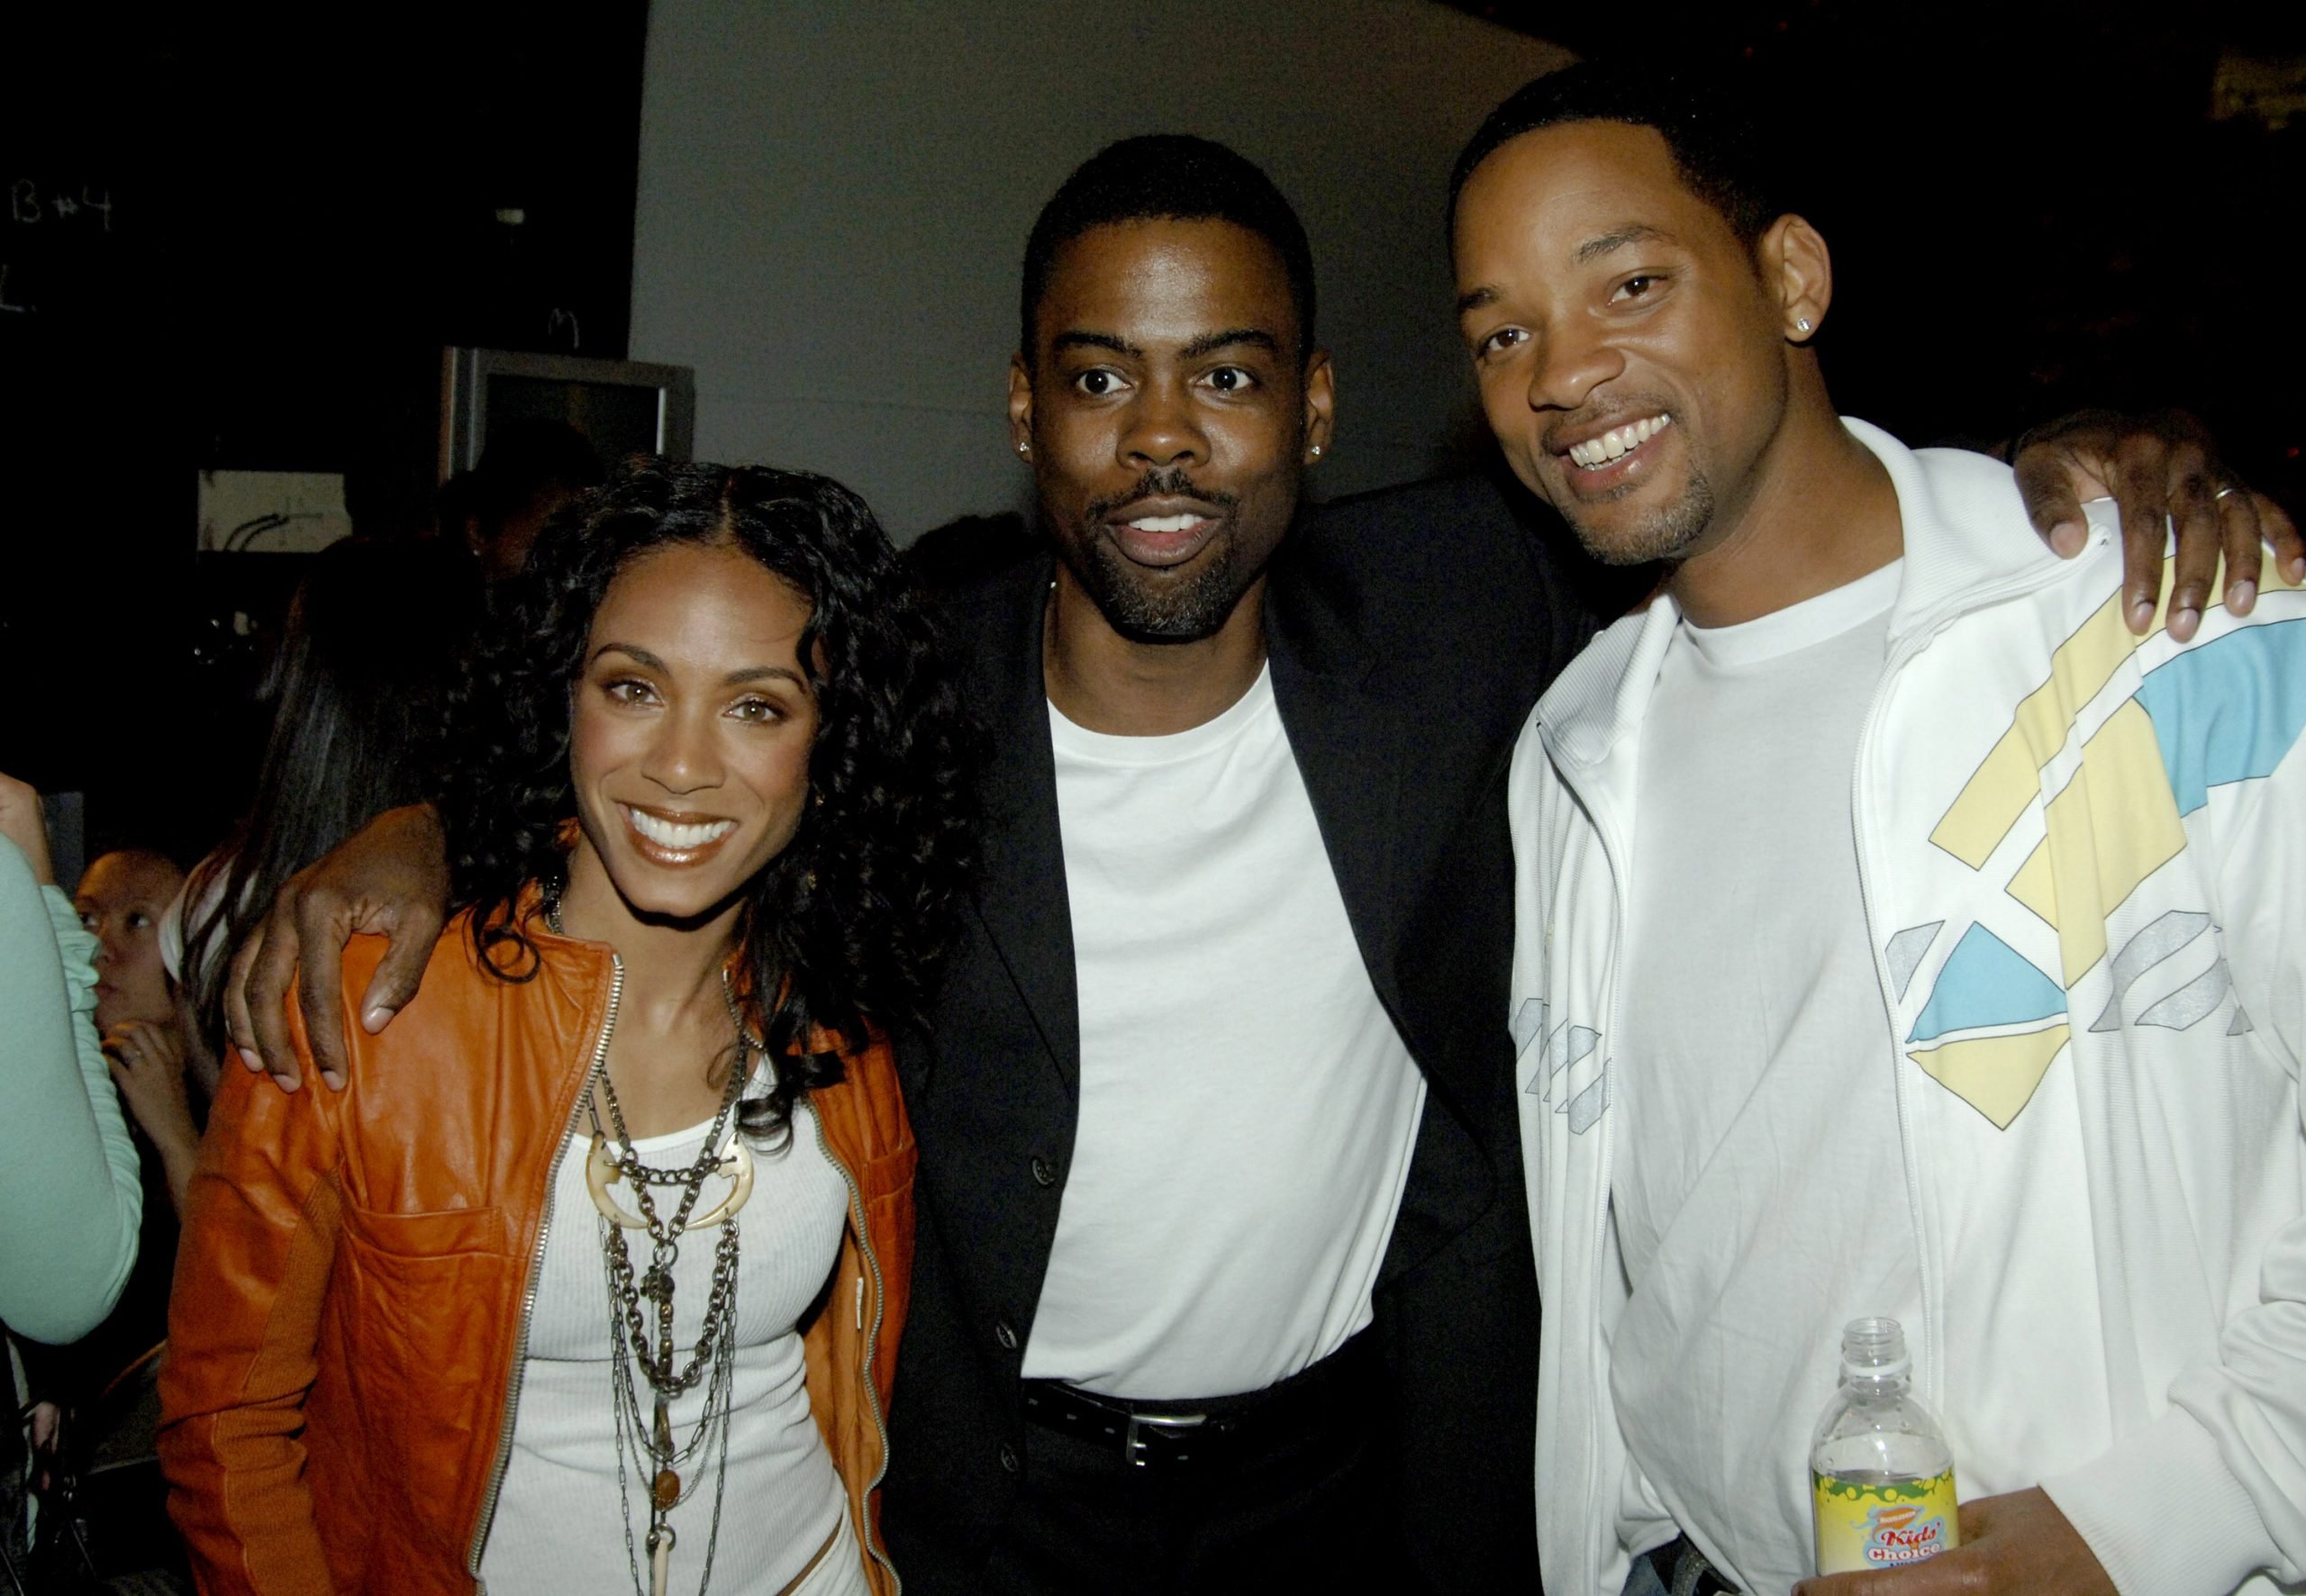 Jada Pinkett Smith, Chris Rock, and Will Smith pose together at an event.